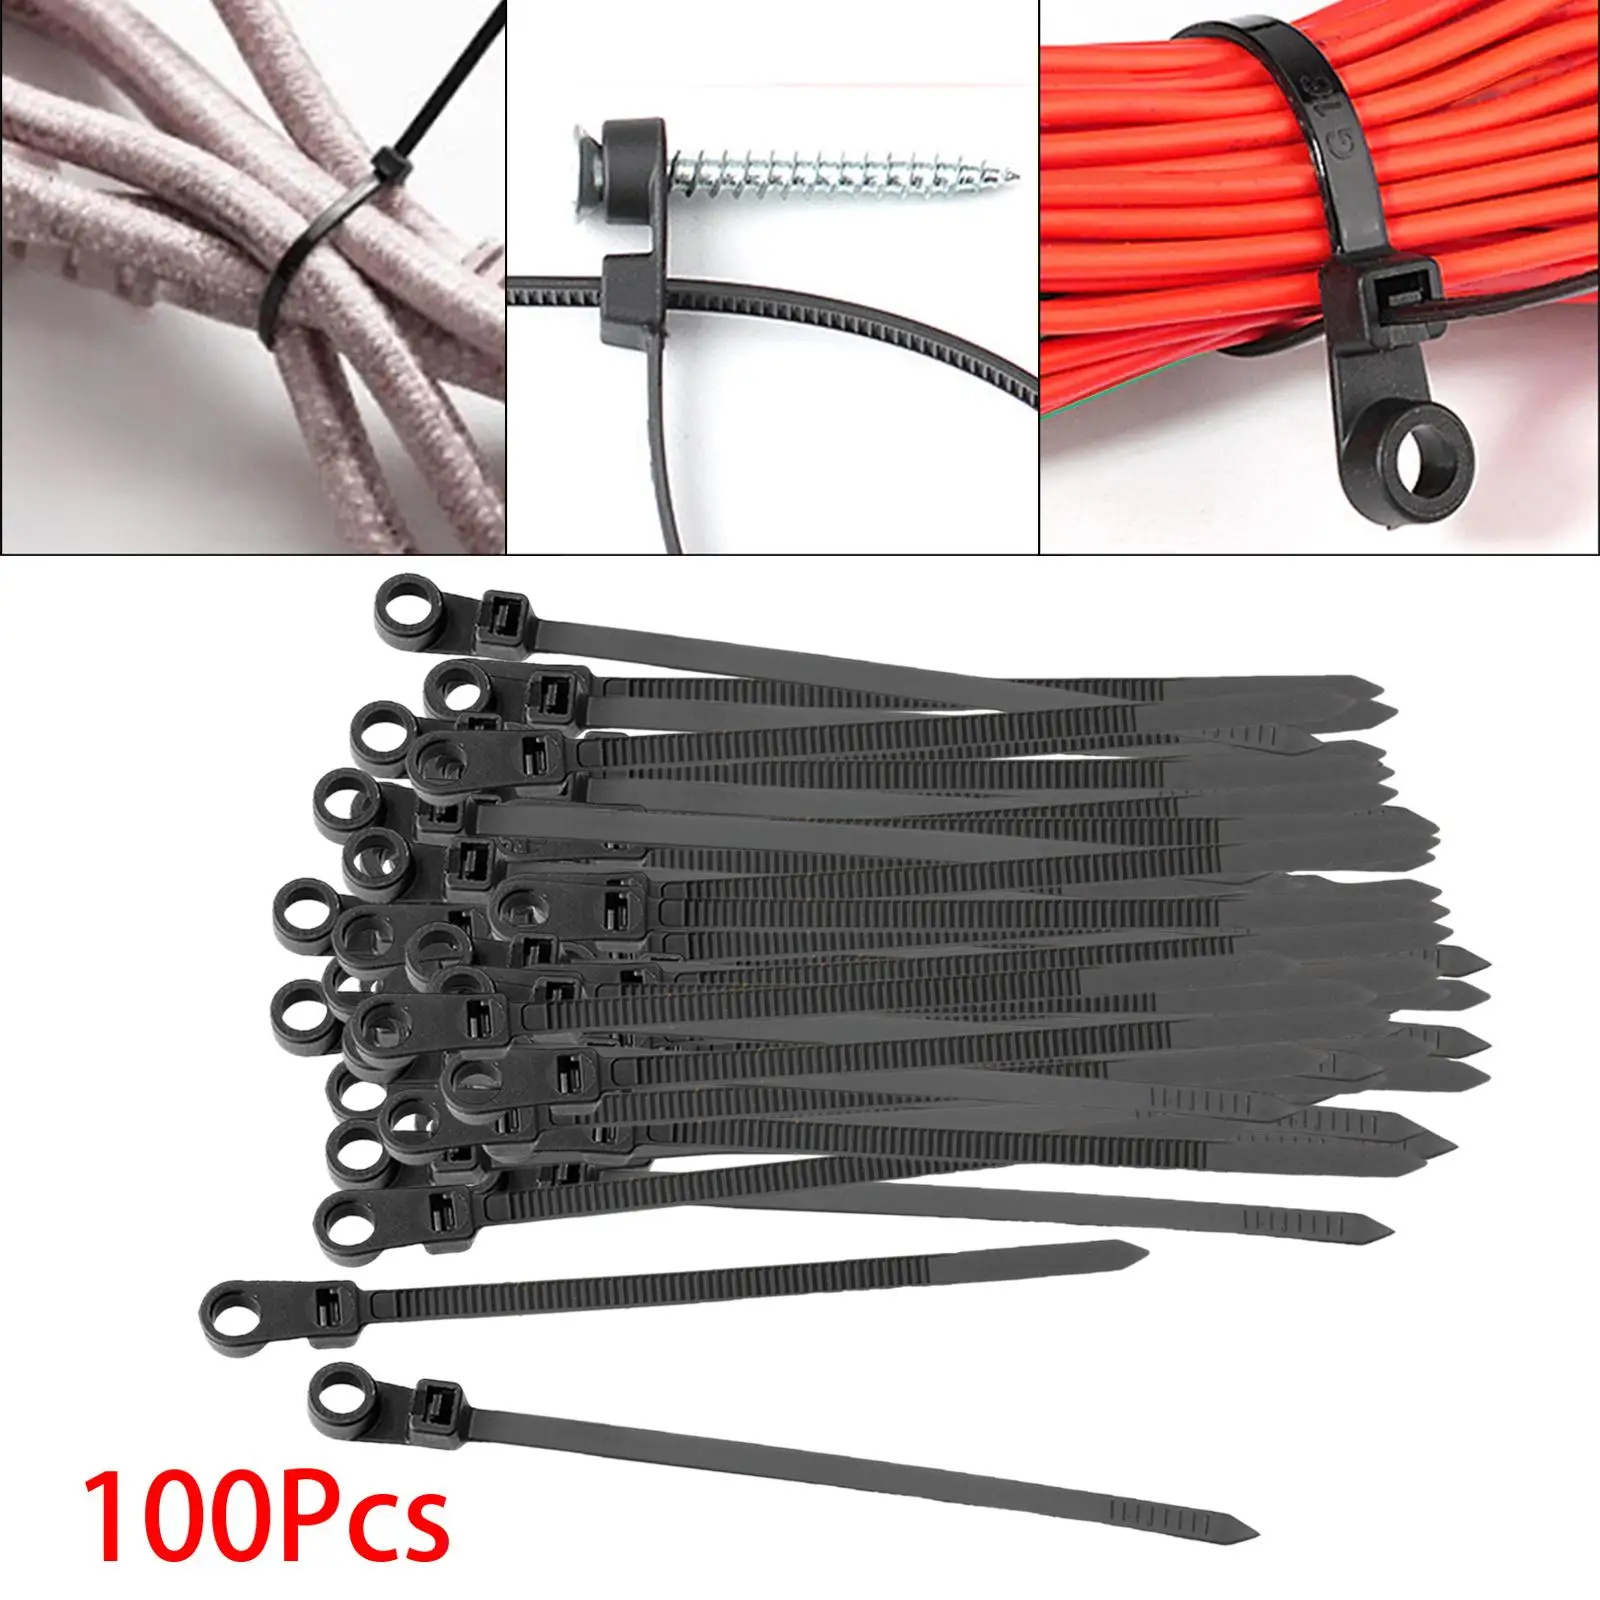 100Pcs Nylon Cable Ties with Fixed Holes Multipurpose Professional Nylon Zip Ties for Office Workshop Garage Home Garden Trellis